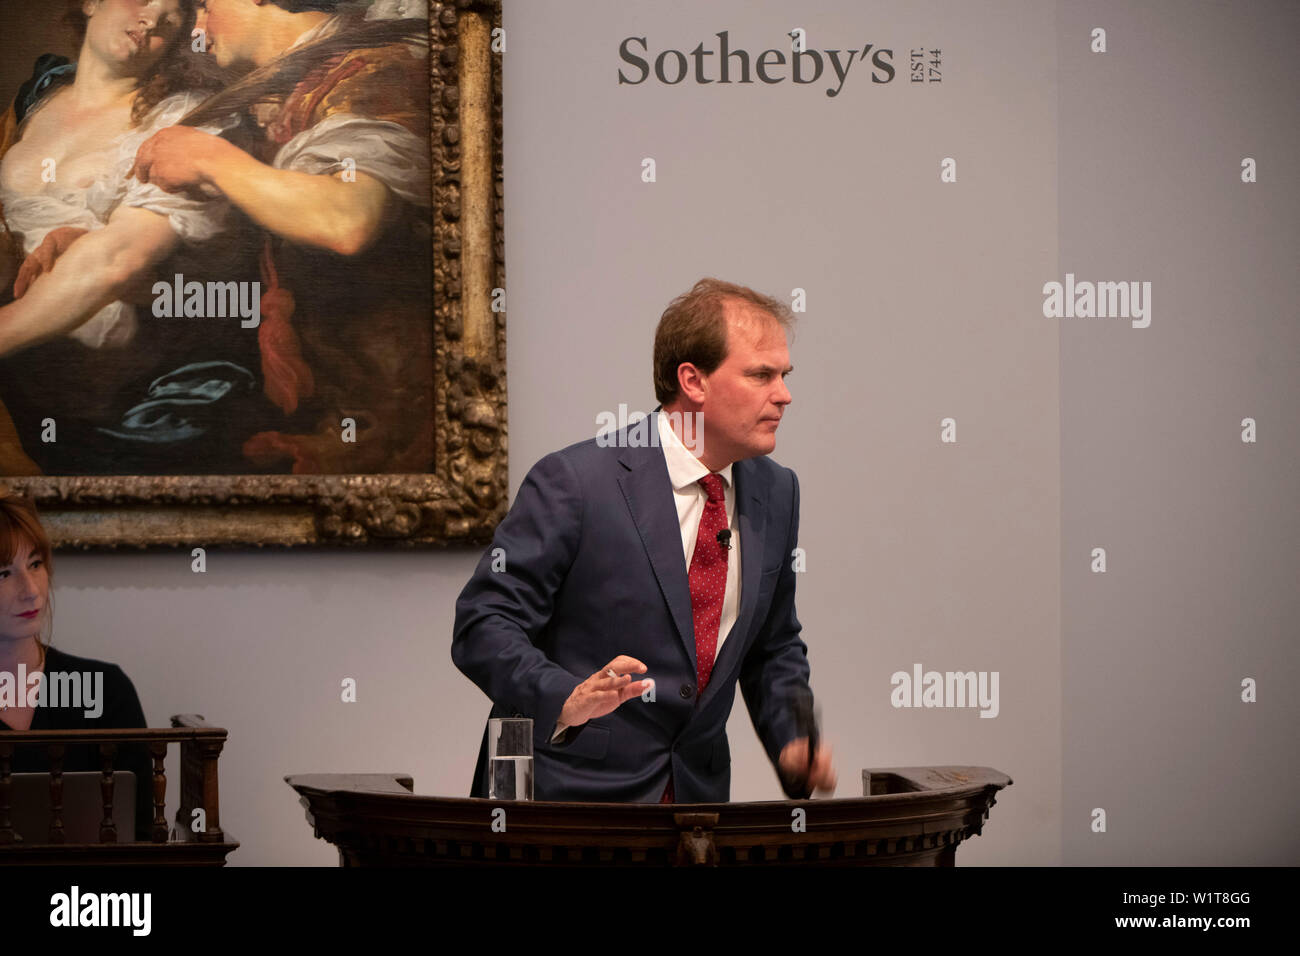 Sotheby’s, London, UK. 3rd July 2019. The summer Old Masters Evening sale offers paintings from the 14th - 19th century by many of the most important painters of Western art. Highlights include a masterpiece by each of Britain’s greatest landscape painters: Turner, Constable and Gainsborough, and extraordinary works from the Baroque including the exceptionally rare Johann Liss (photograph), The Temptation of Saint Mary Magdalene, which sells for £5,665,000. Sale total for the evening was £56,205,950 sterling, the auction taken by Harry Dalmeny (pictured). Credit: Malcolm Park/Alamy Live News. Stock Photo